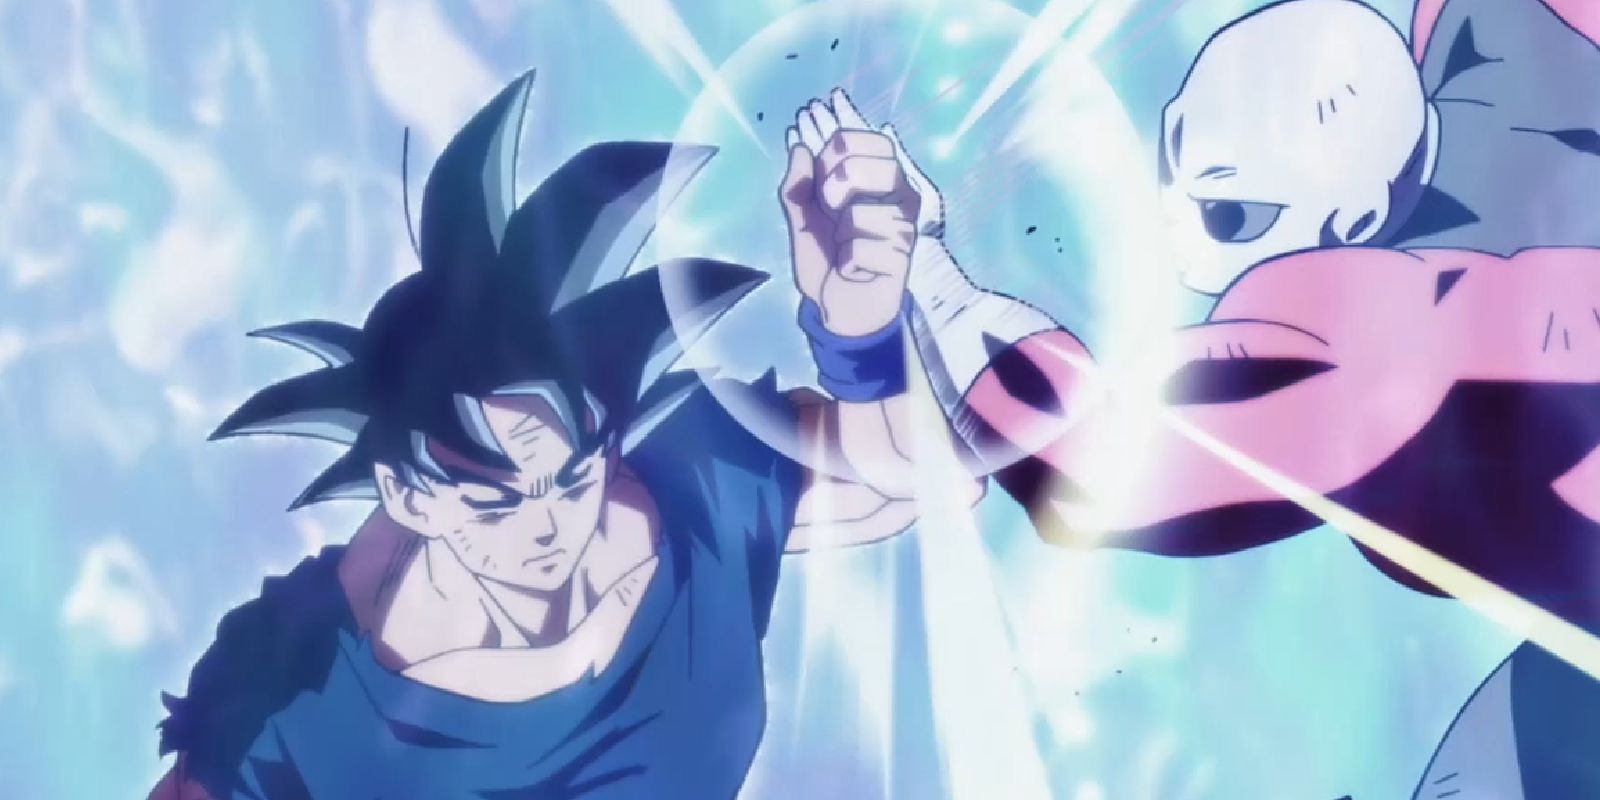 Goku fights Jiren with his eyes closed in Ultra Instinct mode in Dragon Ball Super